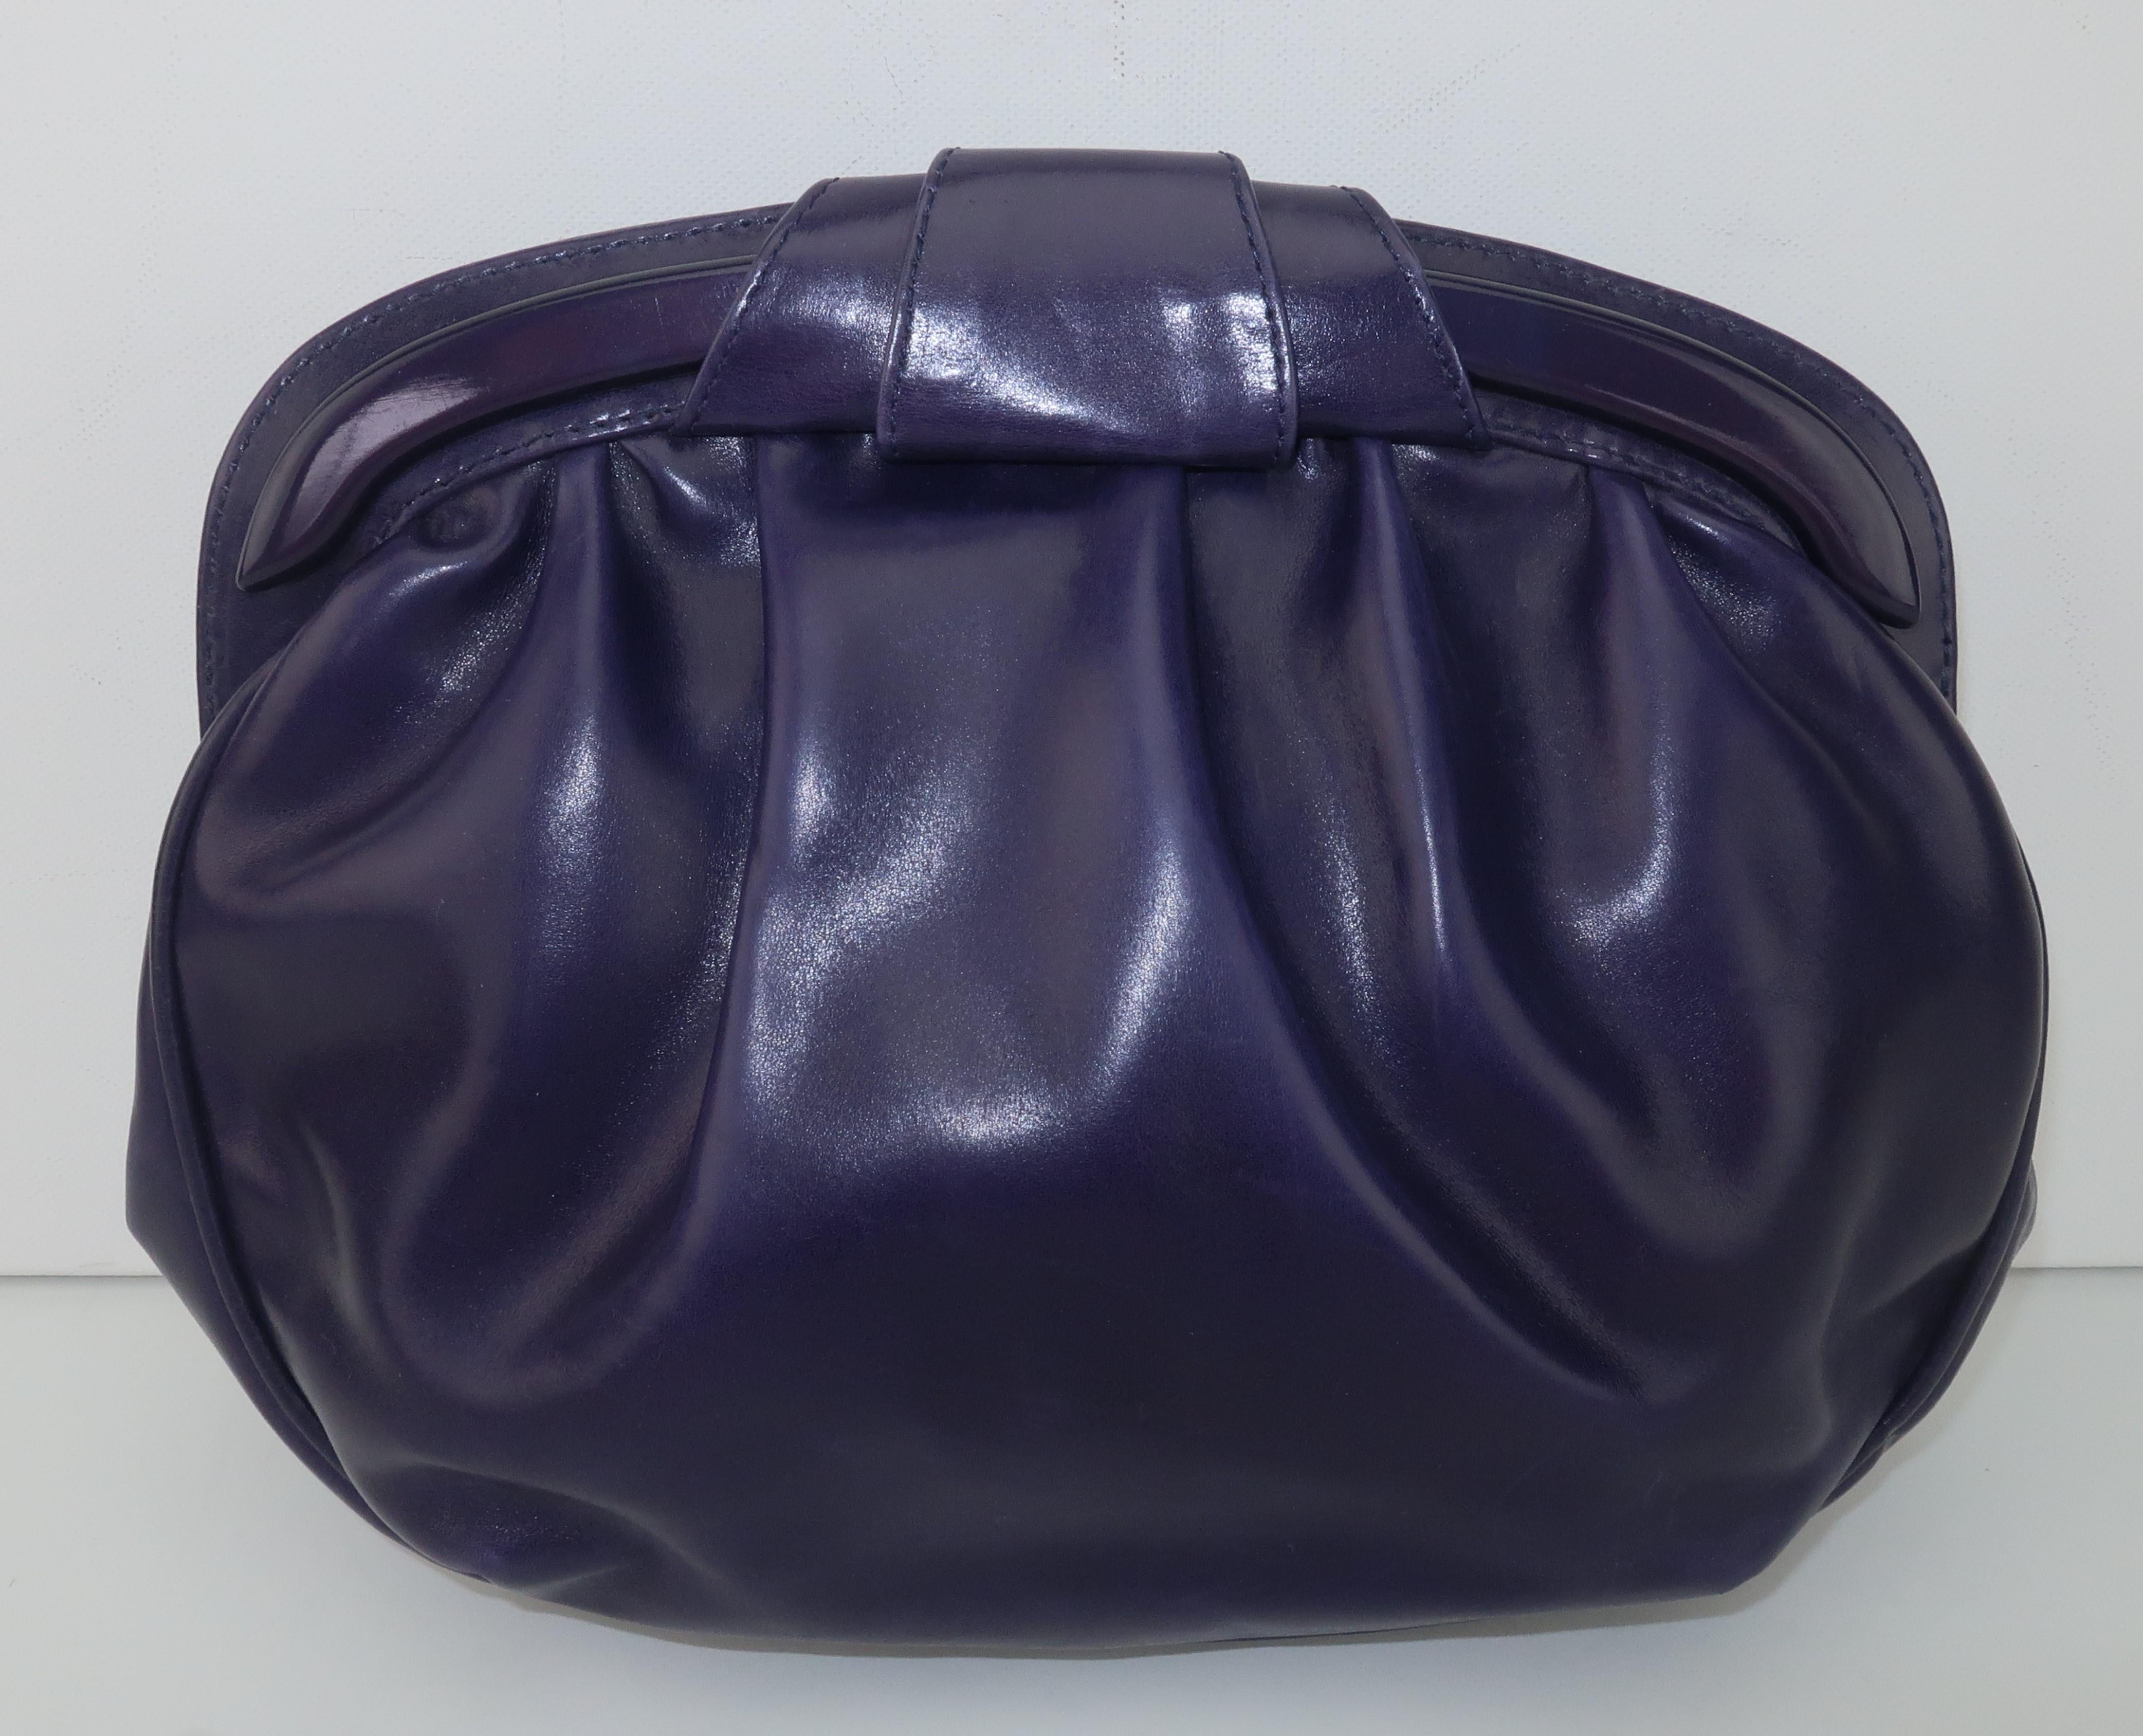 An Italian leather handbag by Chanteuse in a wonderful shade of purple best described as grape.  It has a snap closure at the top of the frame with a coordinating decorative resin bar and top knot for added visual interest.  The lengthy shoulder